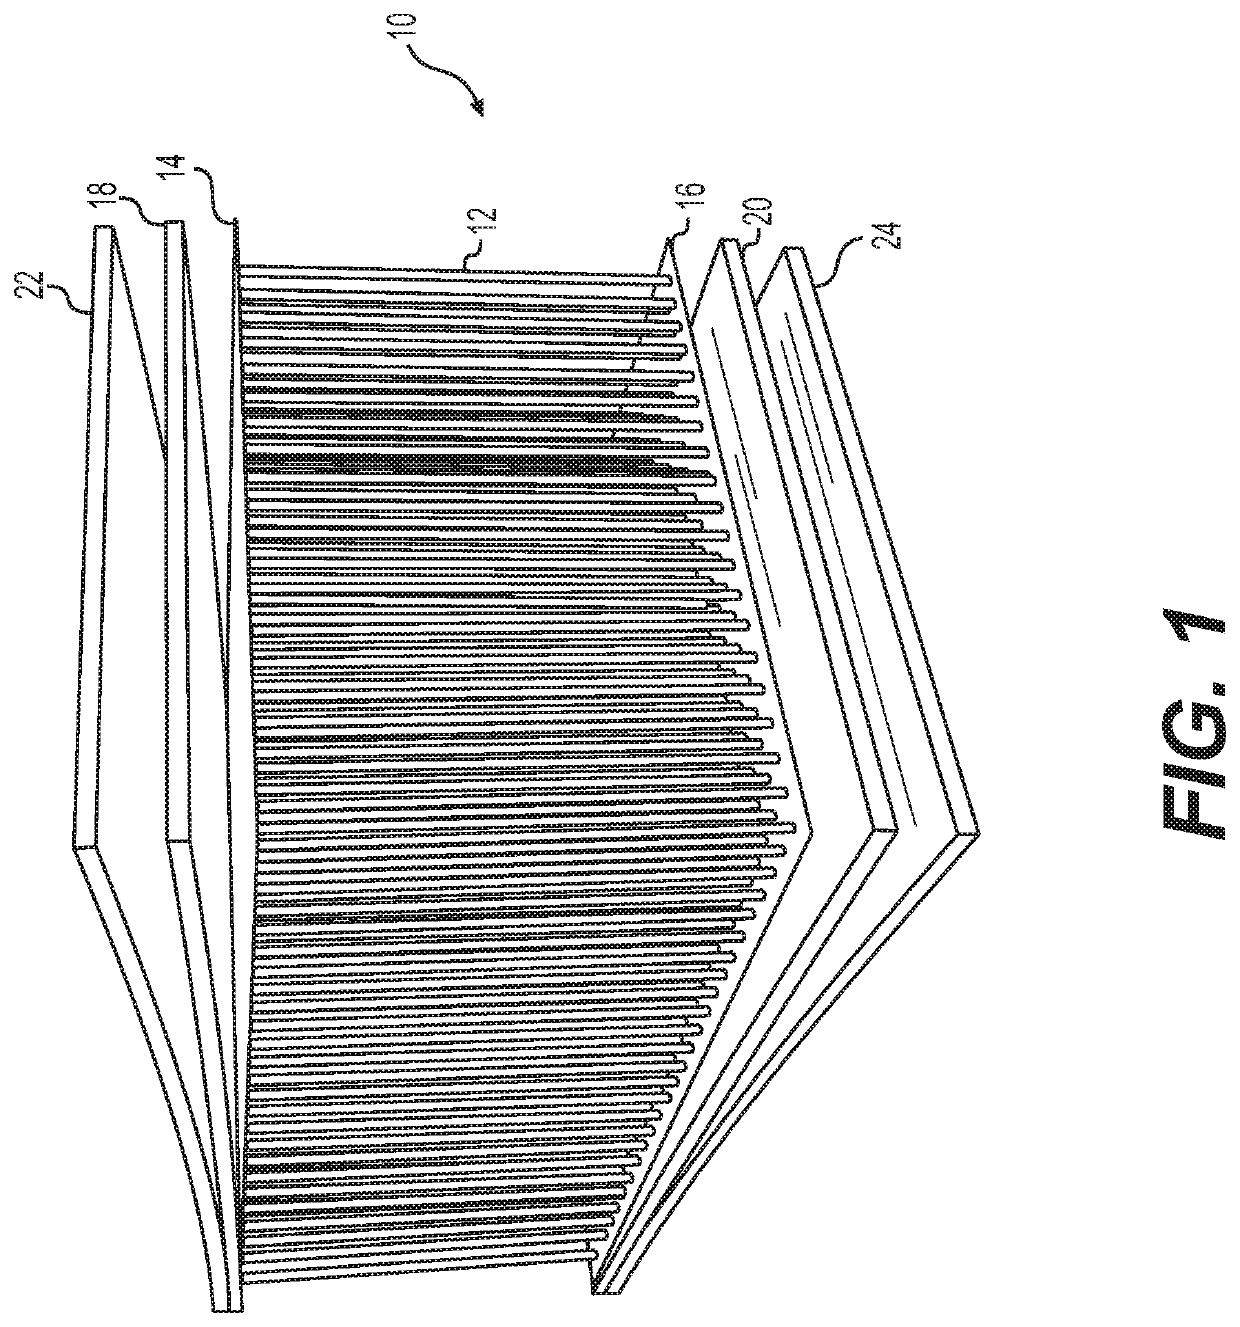 Inflatable and reconfigurable products and methods of making same